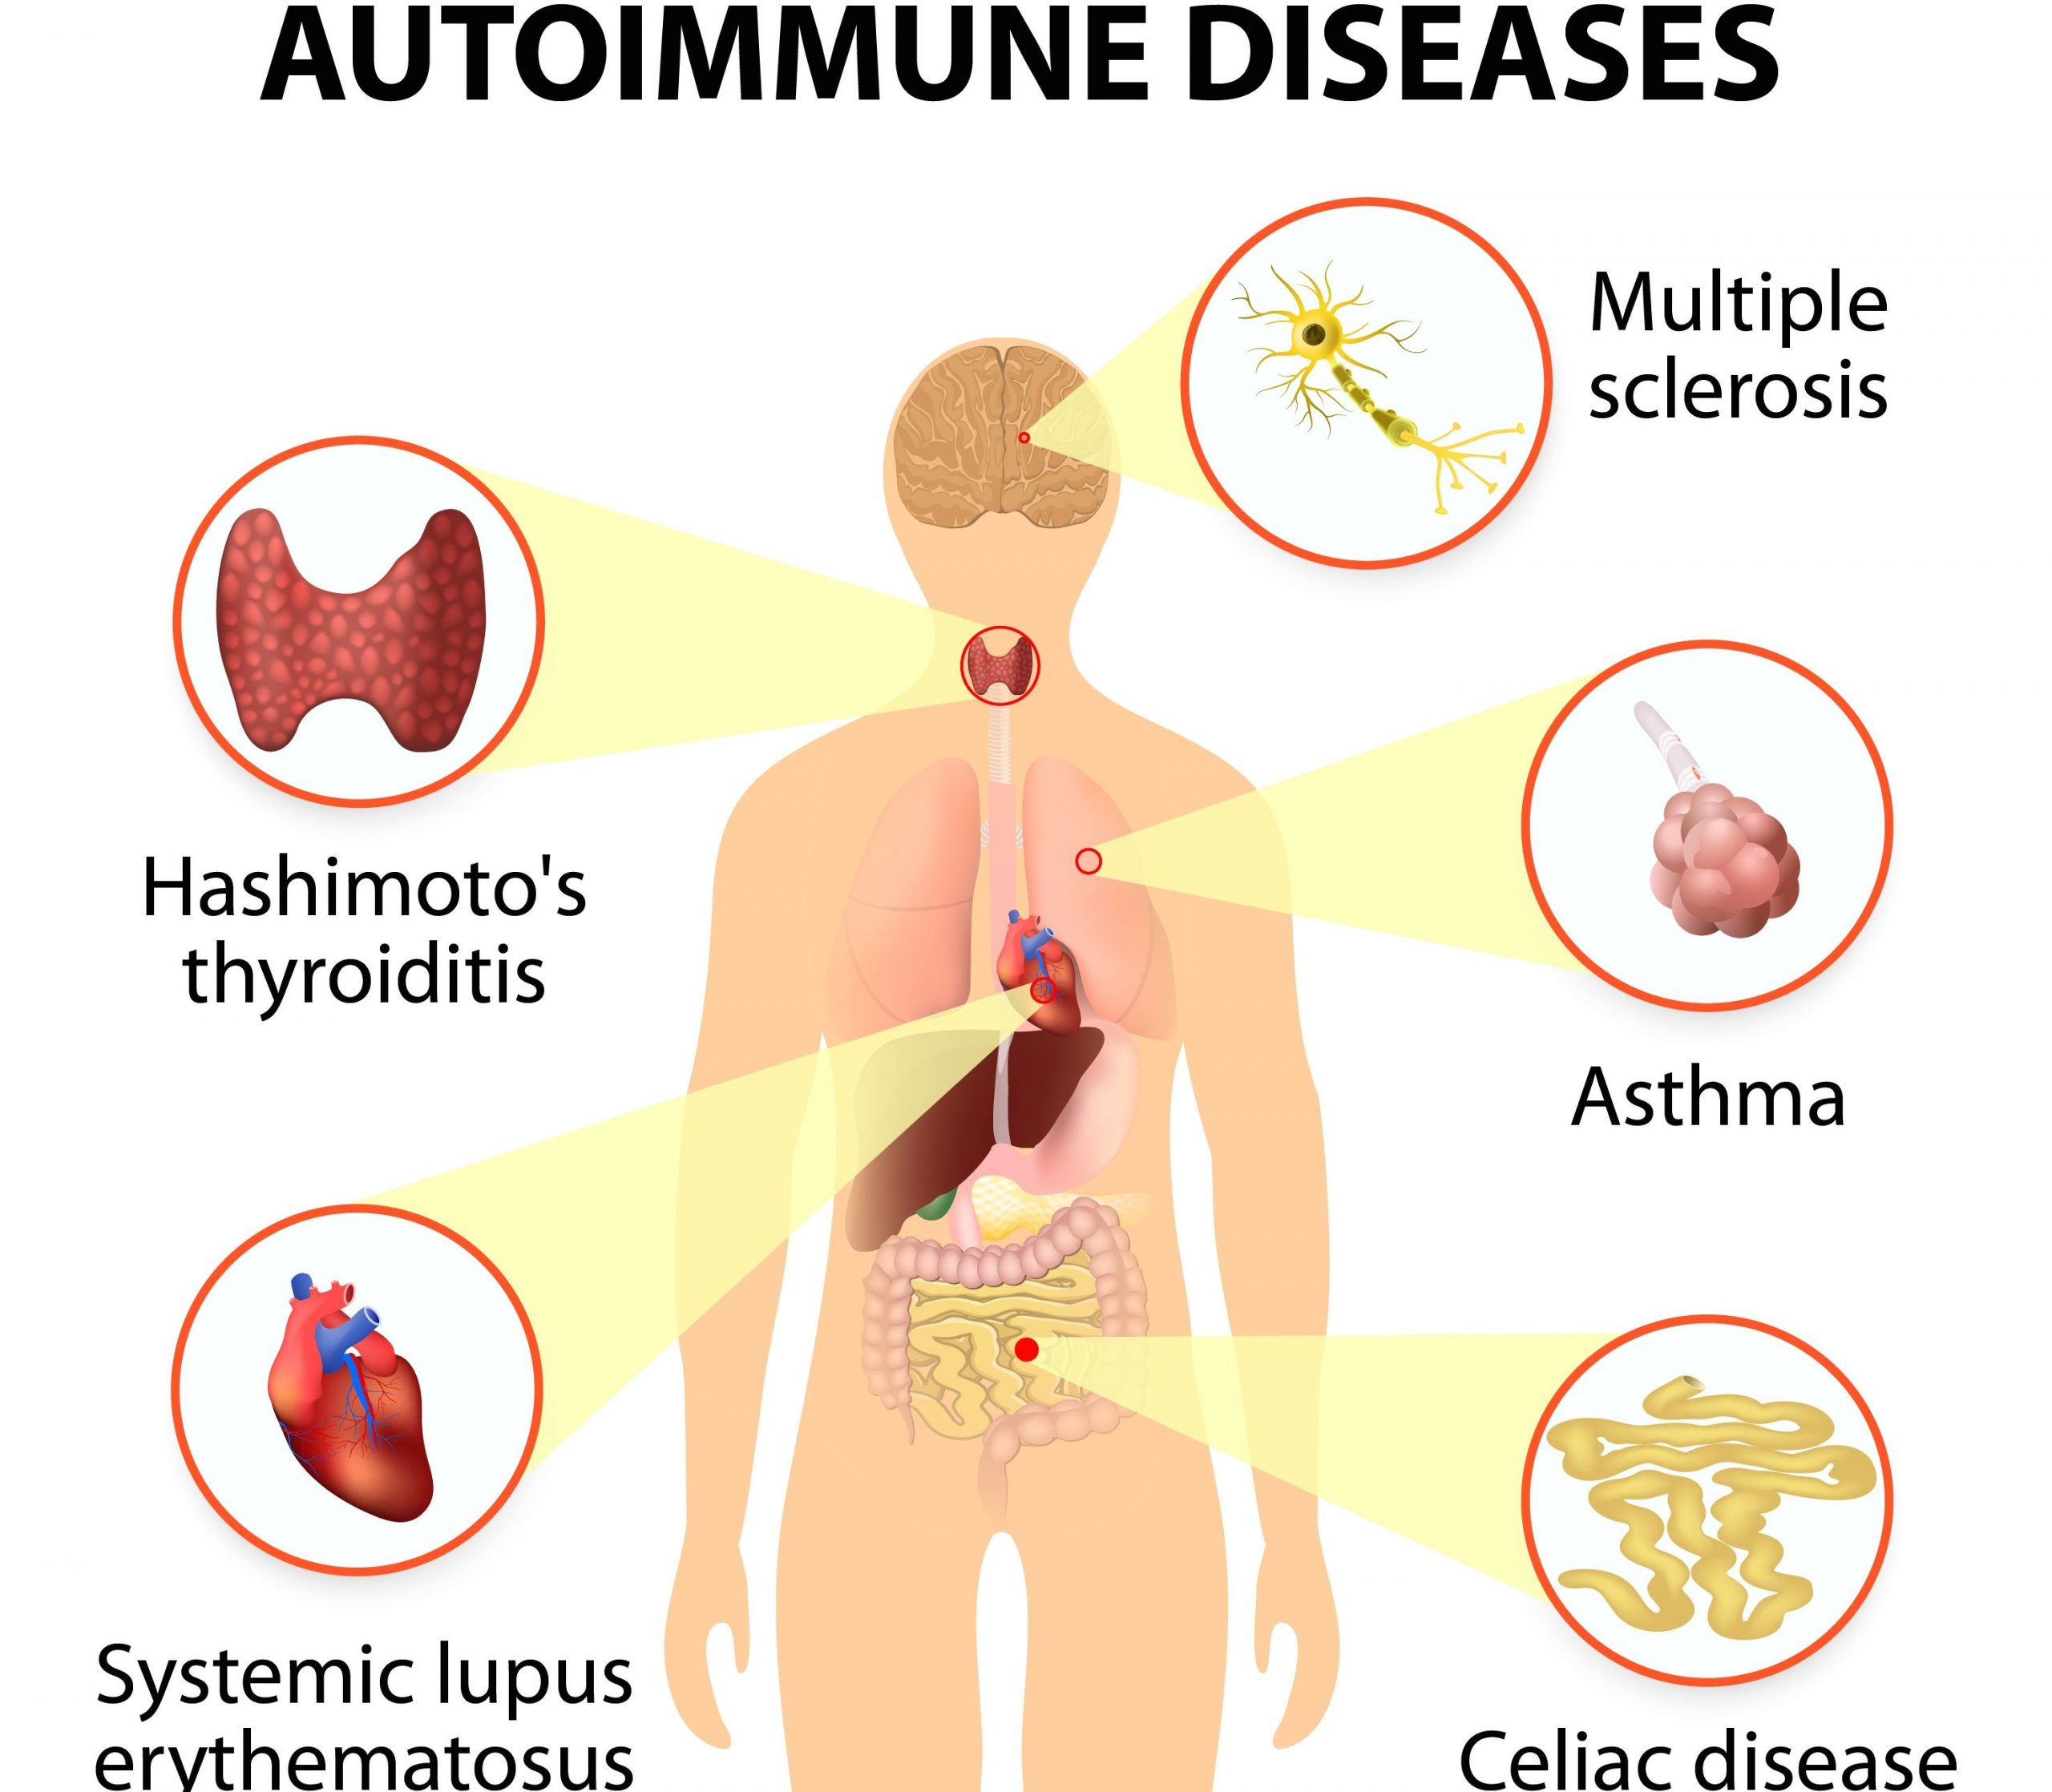 What Do You Think ALL Autoimmune Diseases Have In Common?